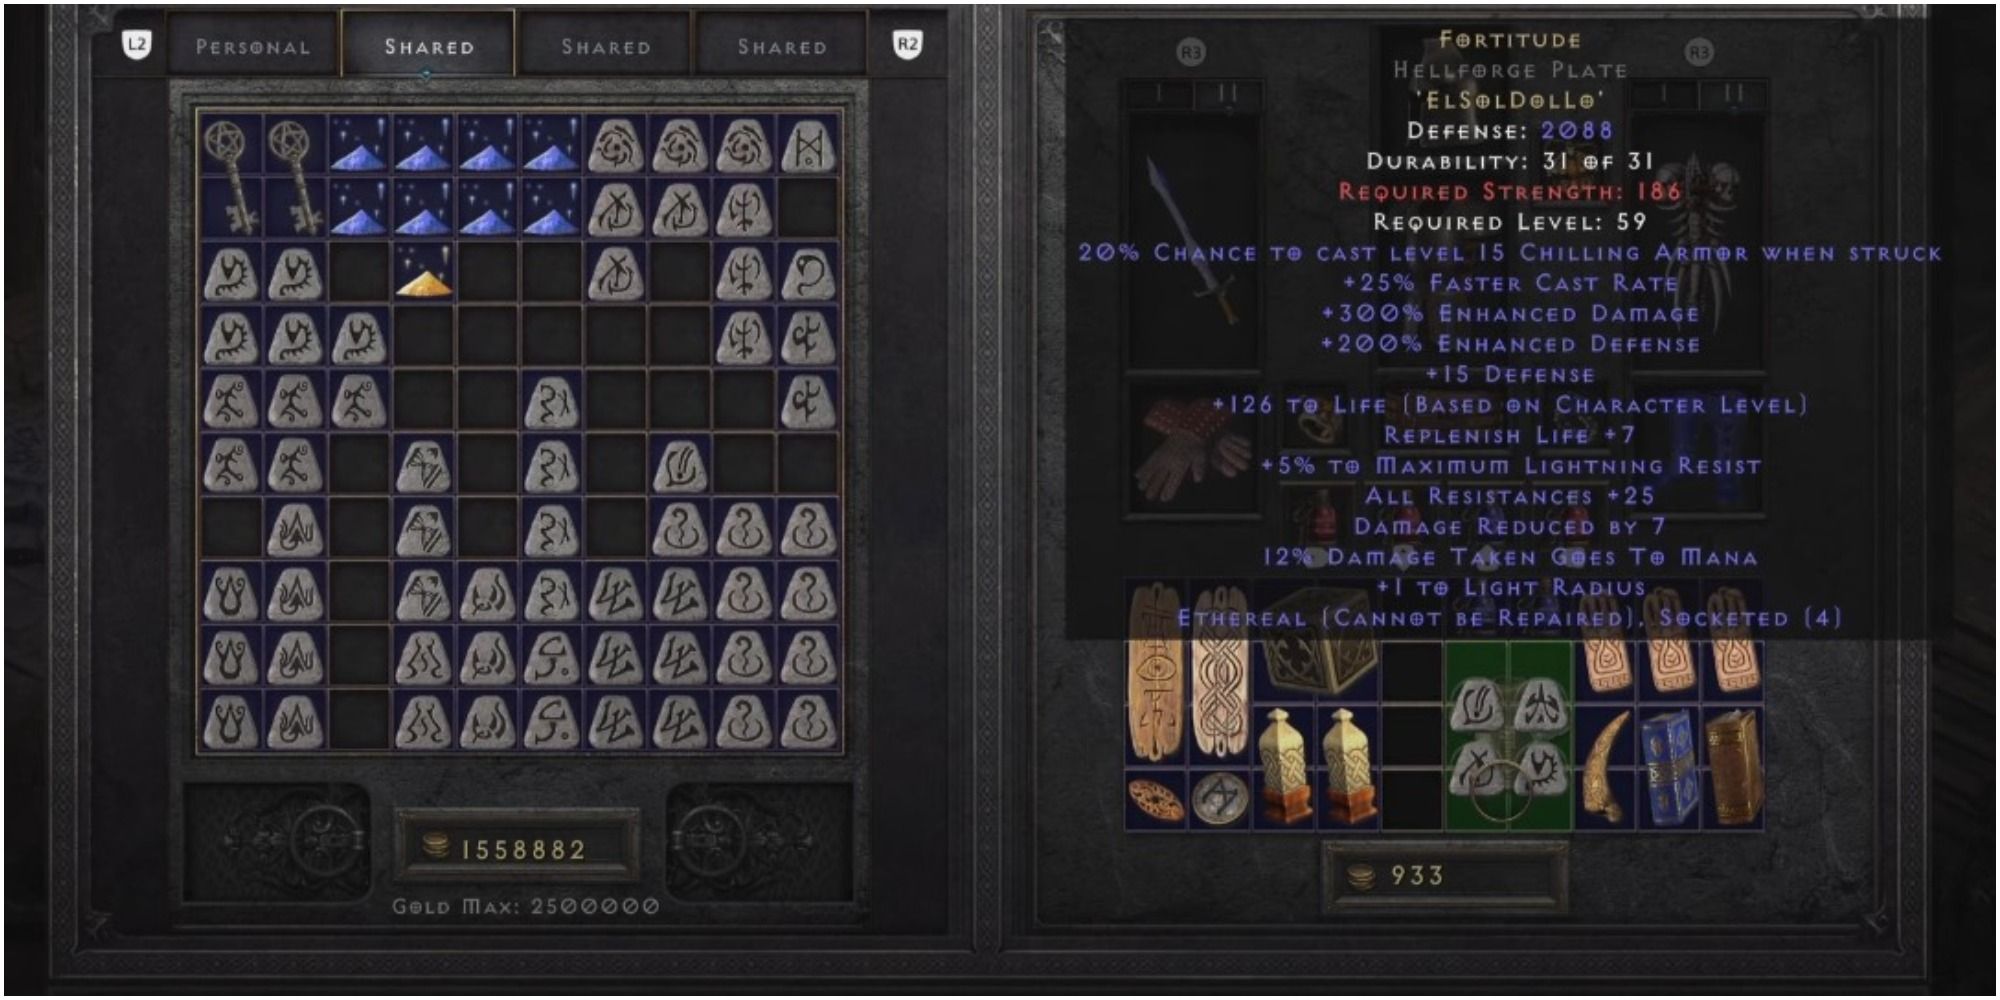 Diablo 2 Resurrected Fortitude Armor In The Player Inventory